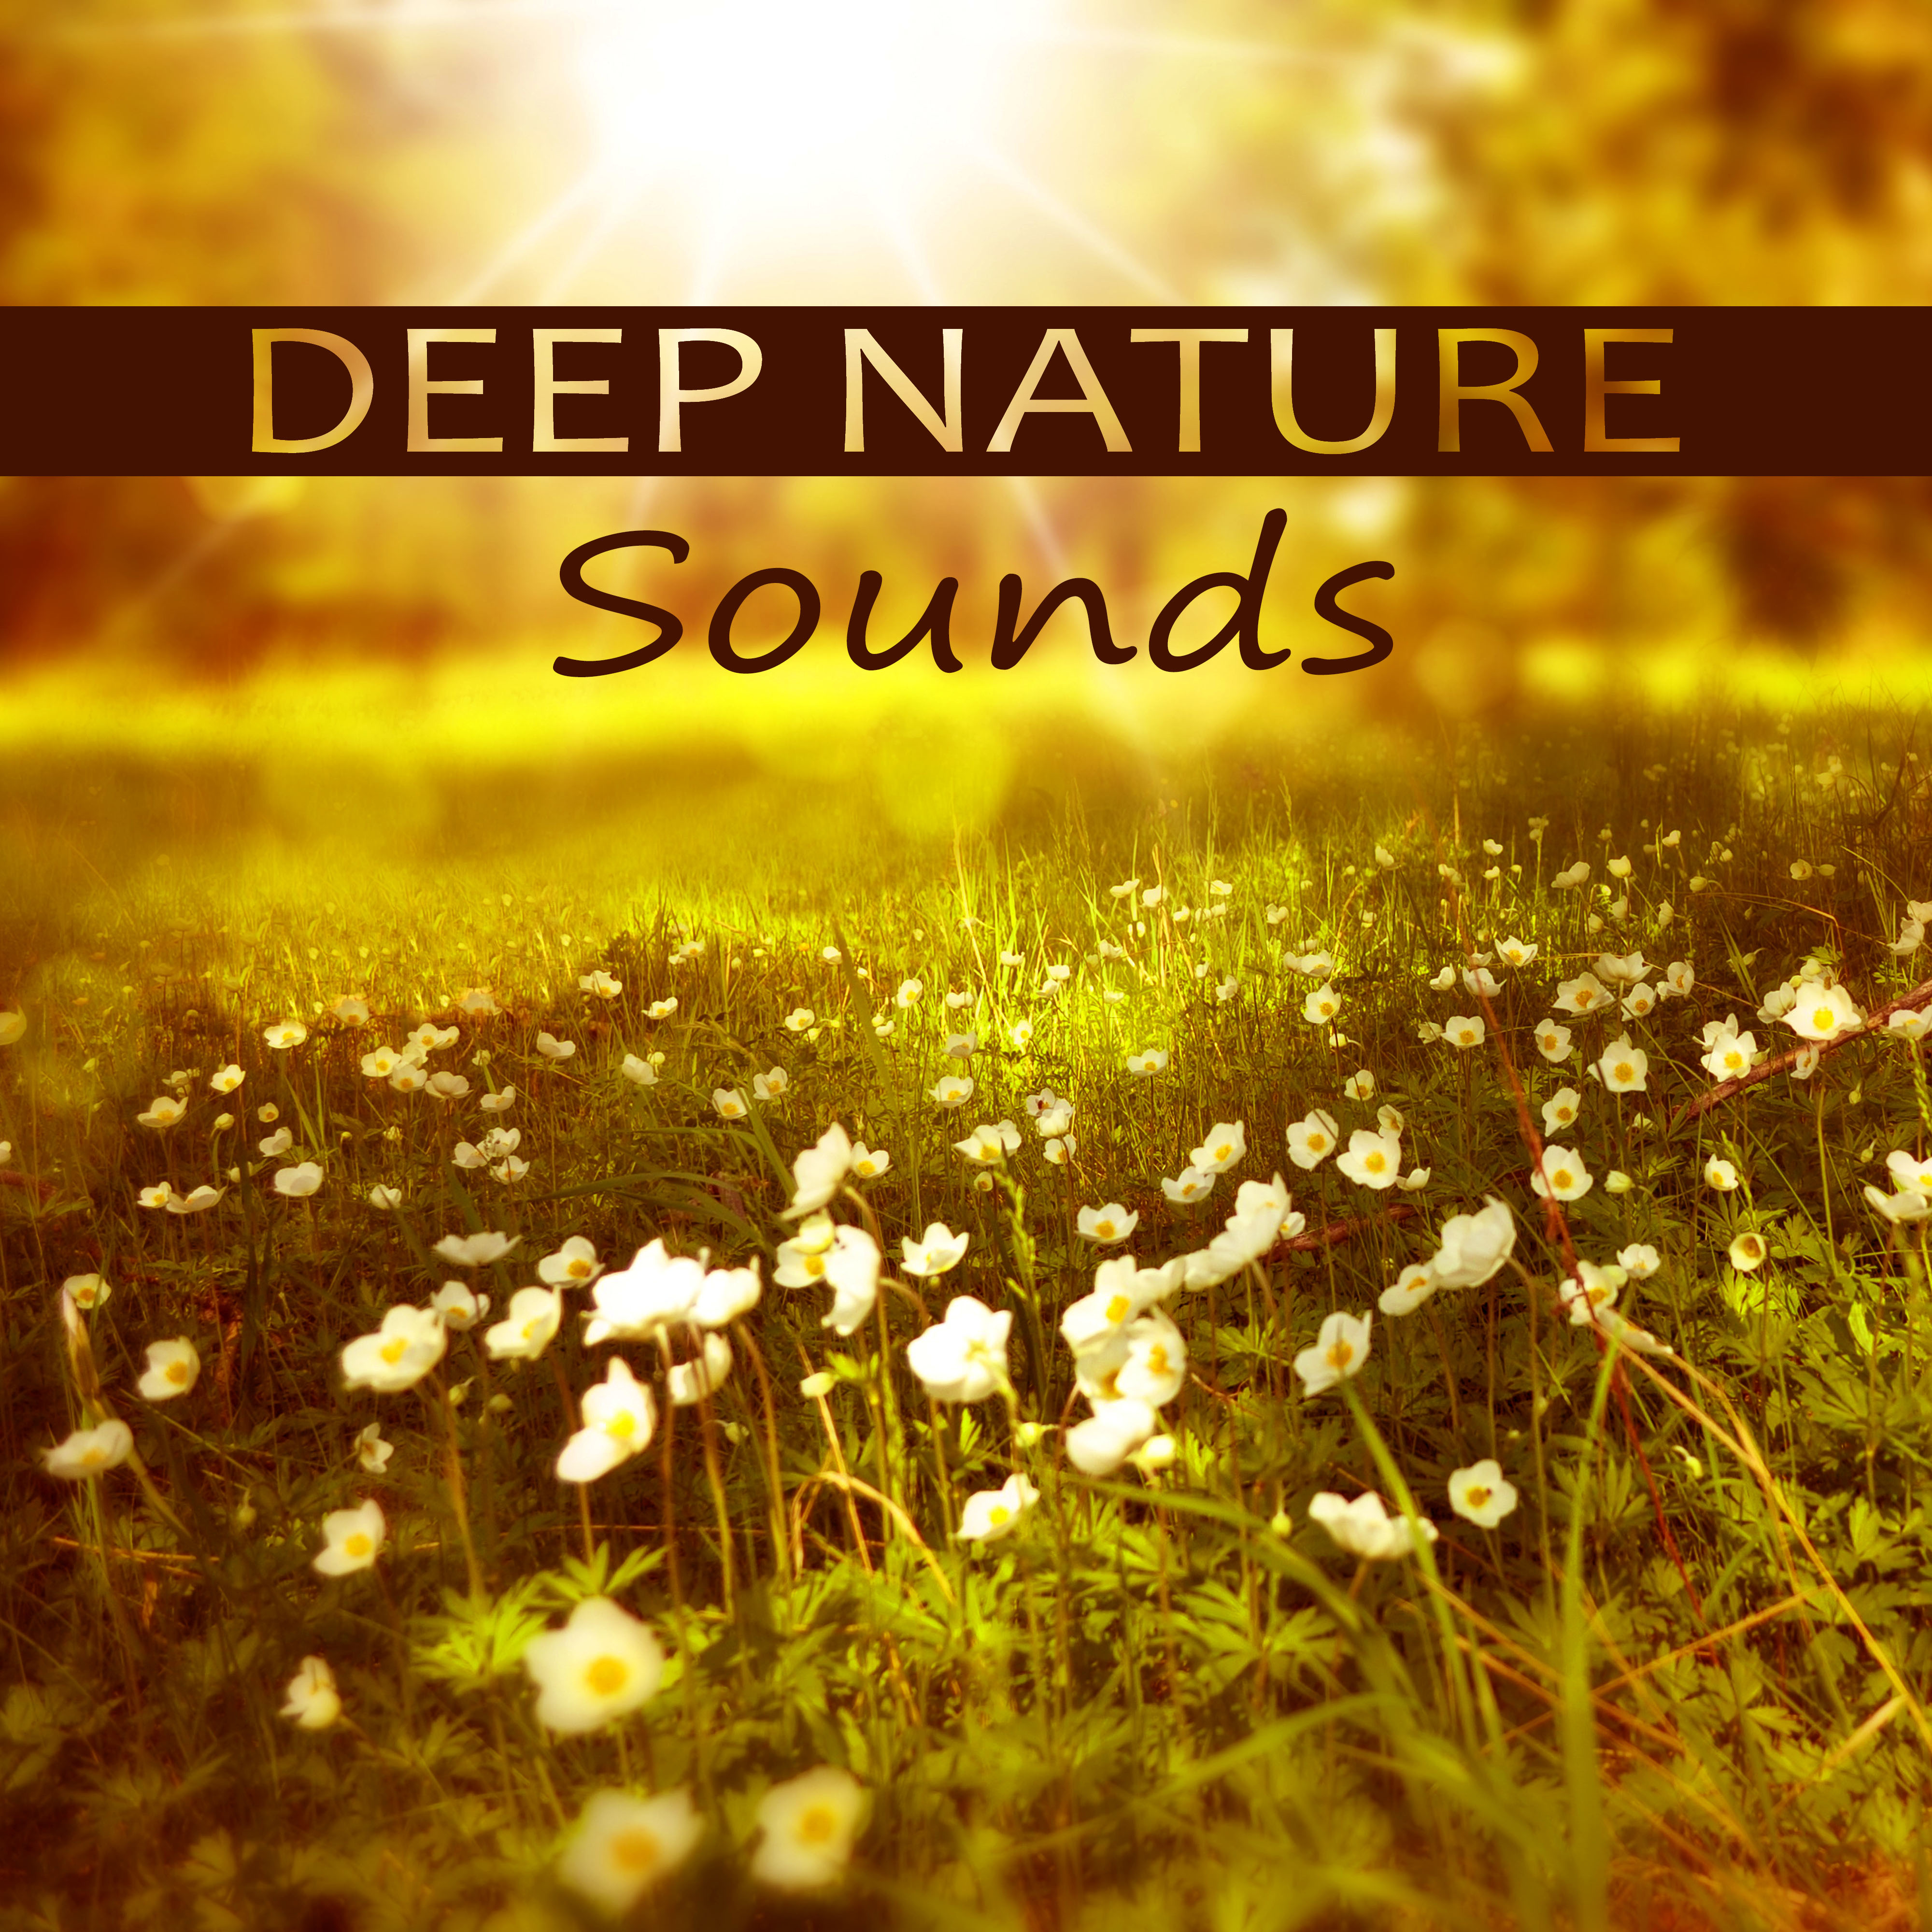 Deep Nature Sounds – Calm Sounds for Meditation, Soft Music for Relaxation, Nature Sounds, Inspiring Music